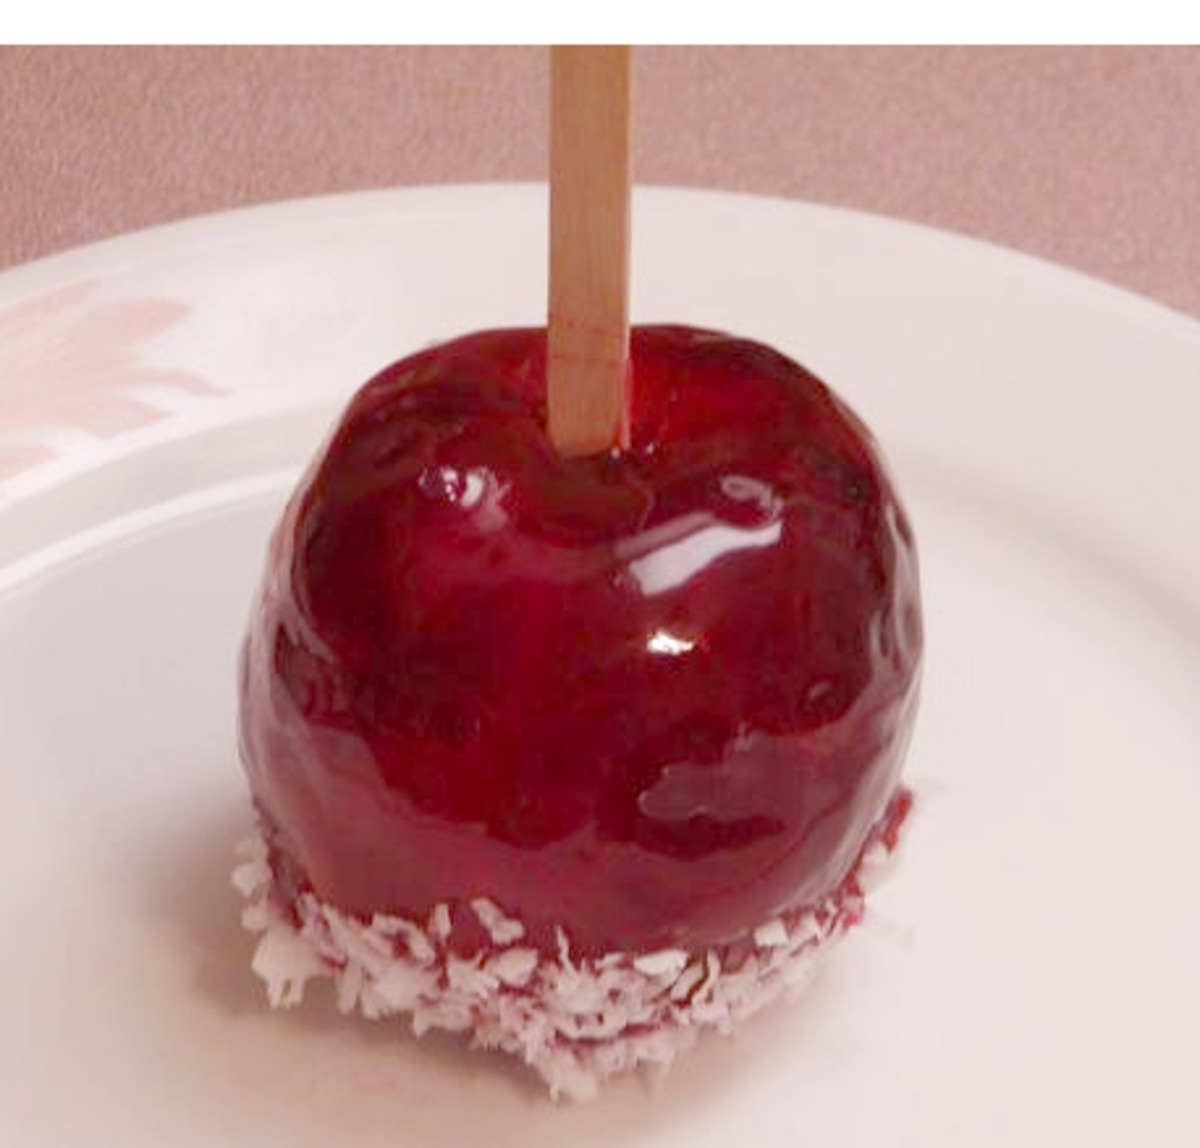 Candied Apples Topped With Coconut image